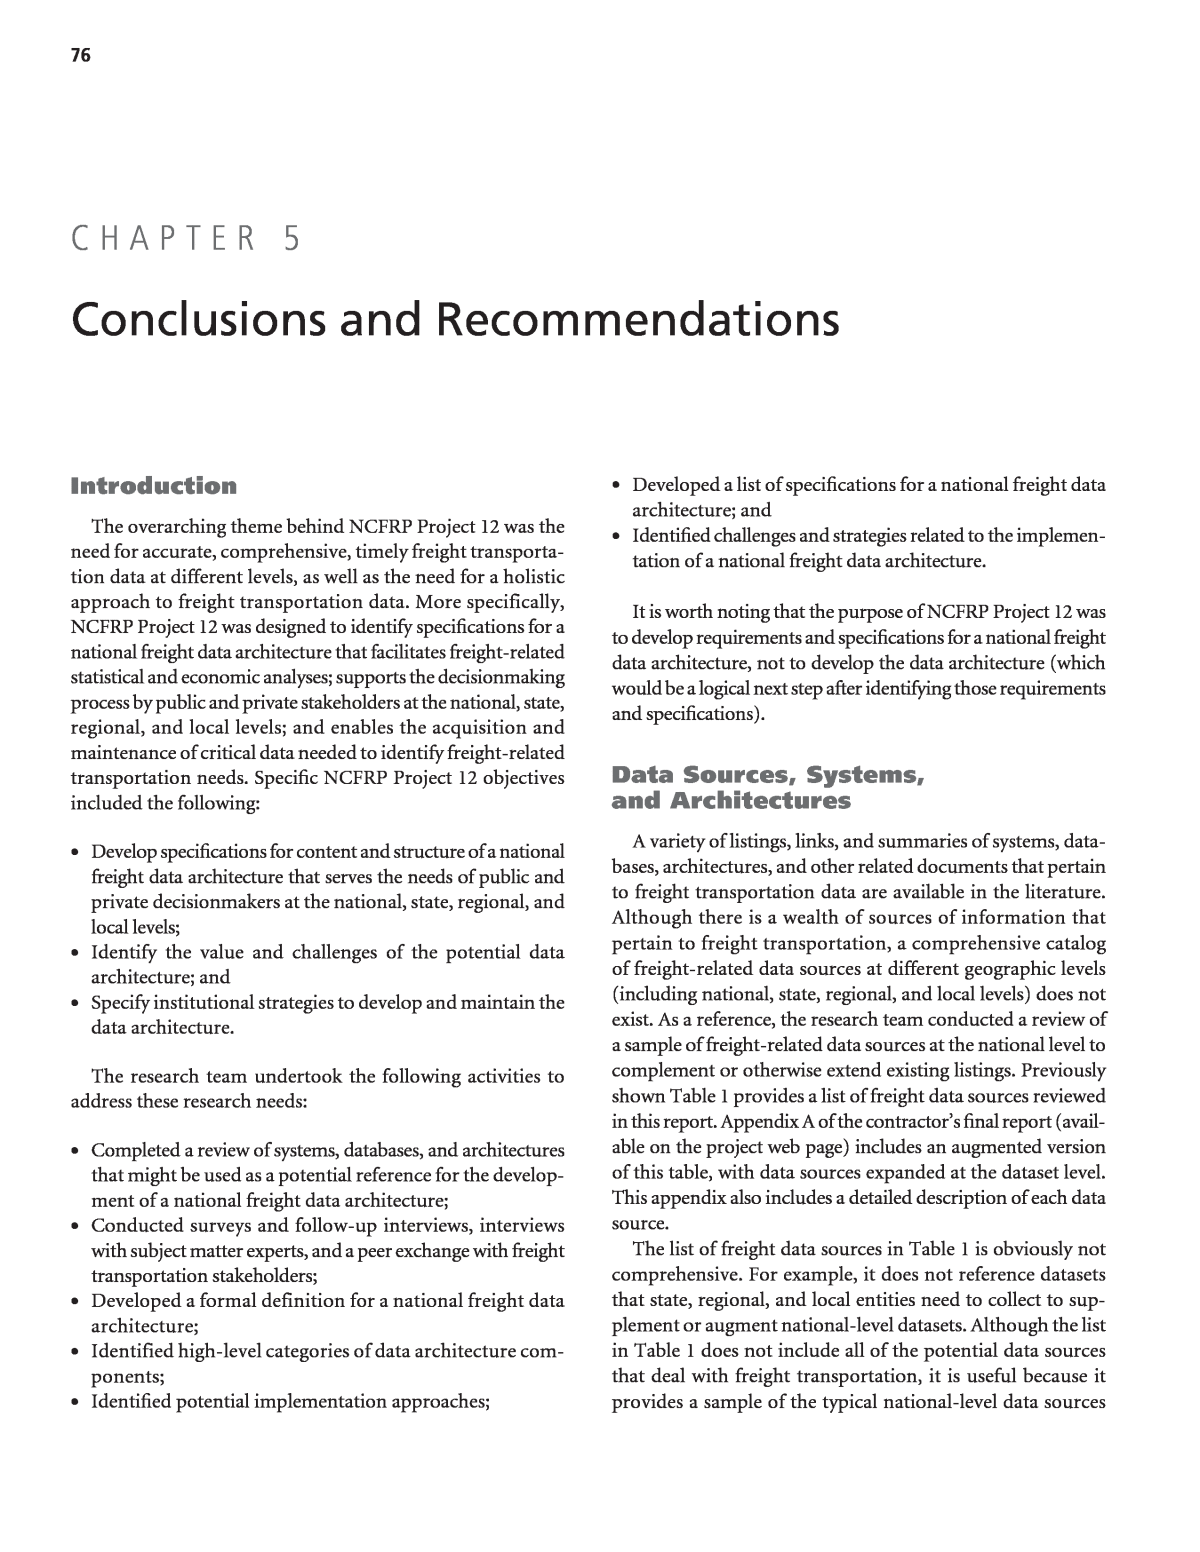 thesis chapter 5 recommendation in research example